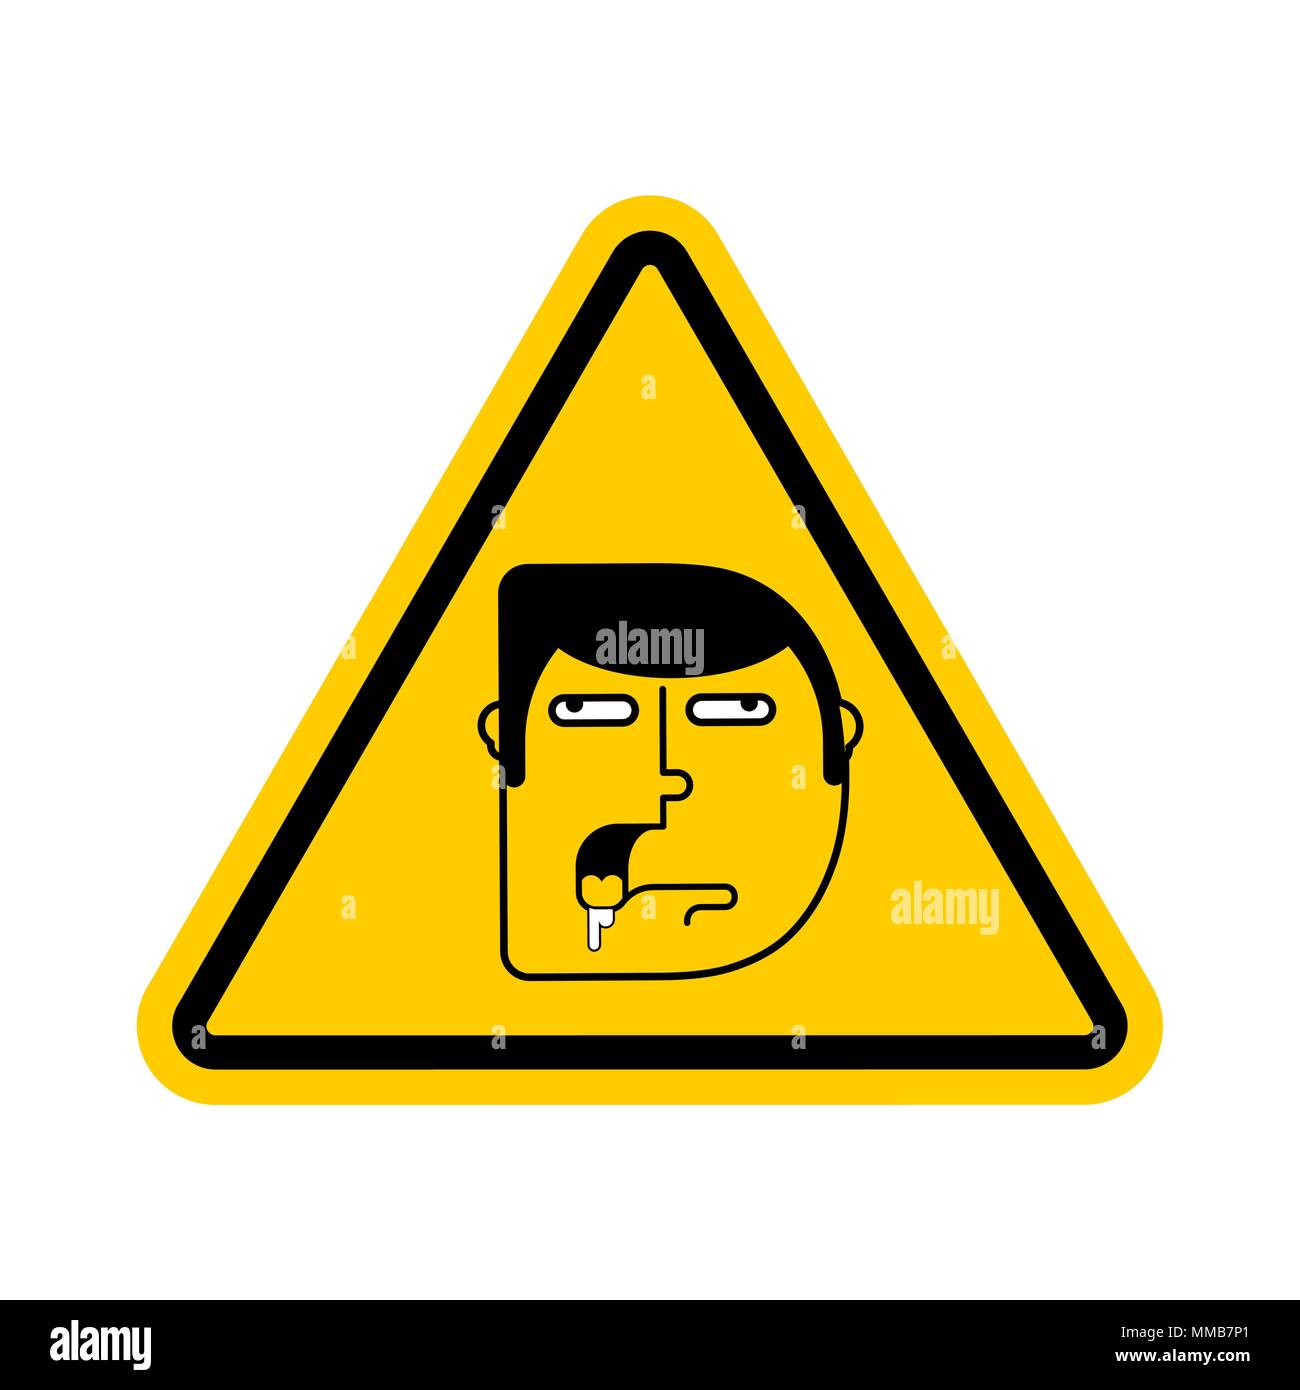 Attention stupid. Caution blunt. Road yellow Warning sign. Look out fool. Vector illustration Stock Vector